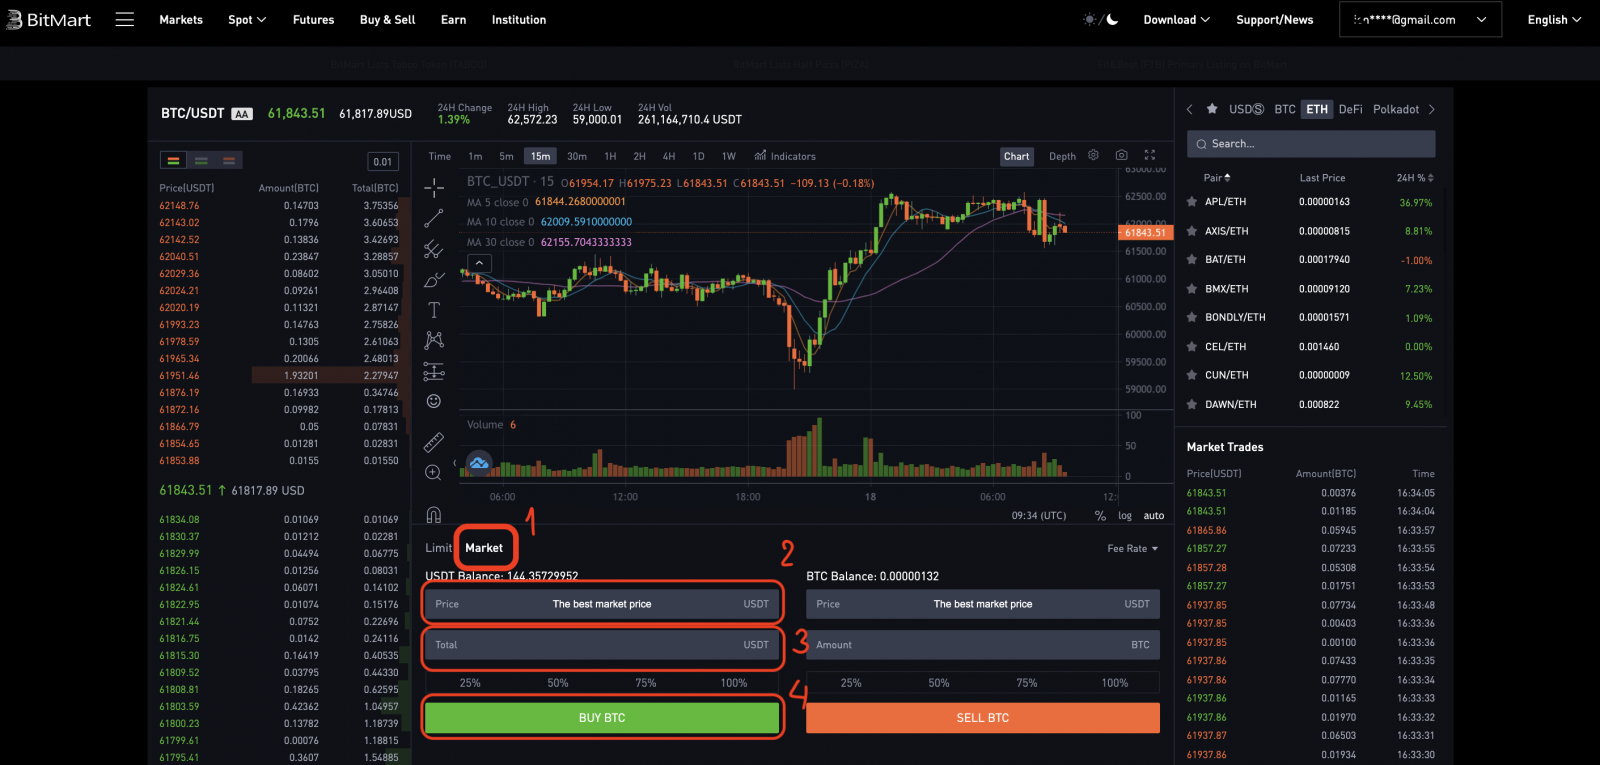 How to Deposit and Trade in BitMart